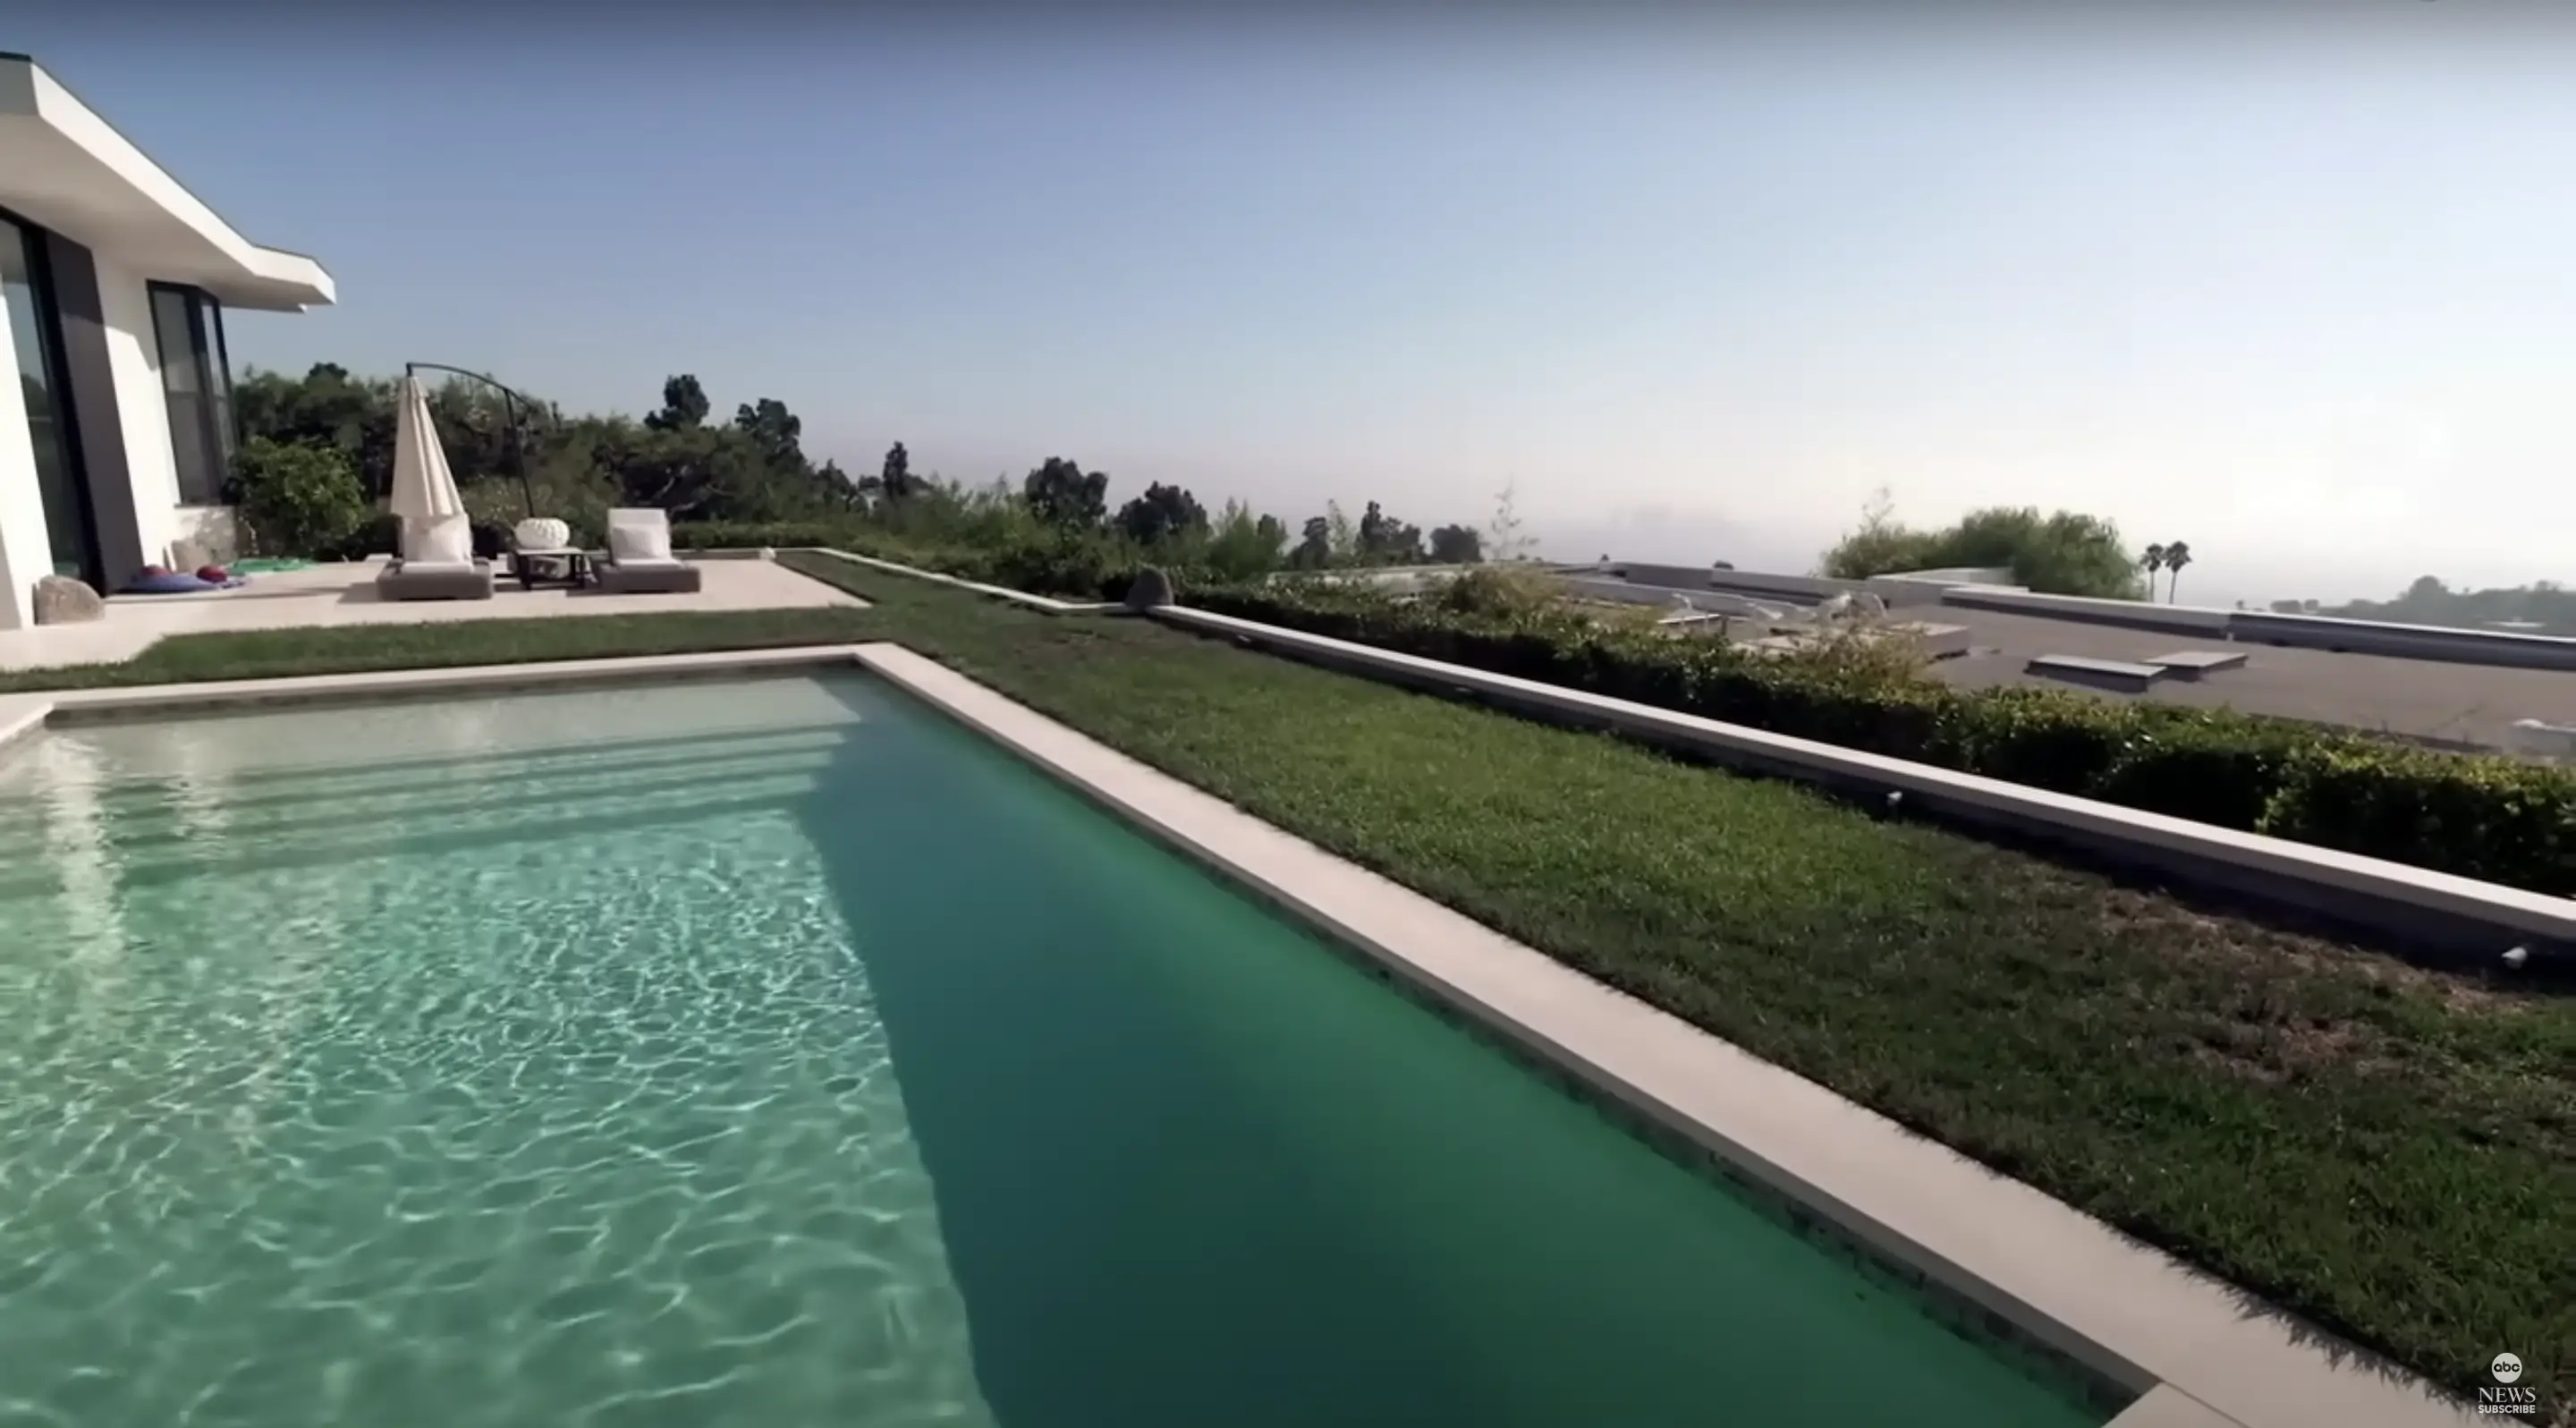 Matthew Perry's pool from a video dated October 29, 2022 | Source: Youtube.com/@ABCNews